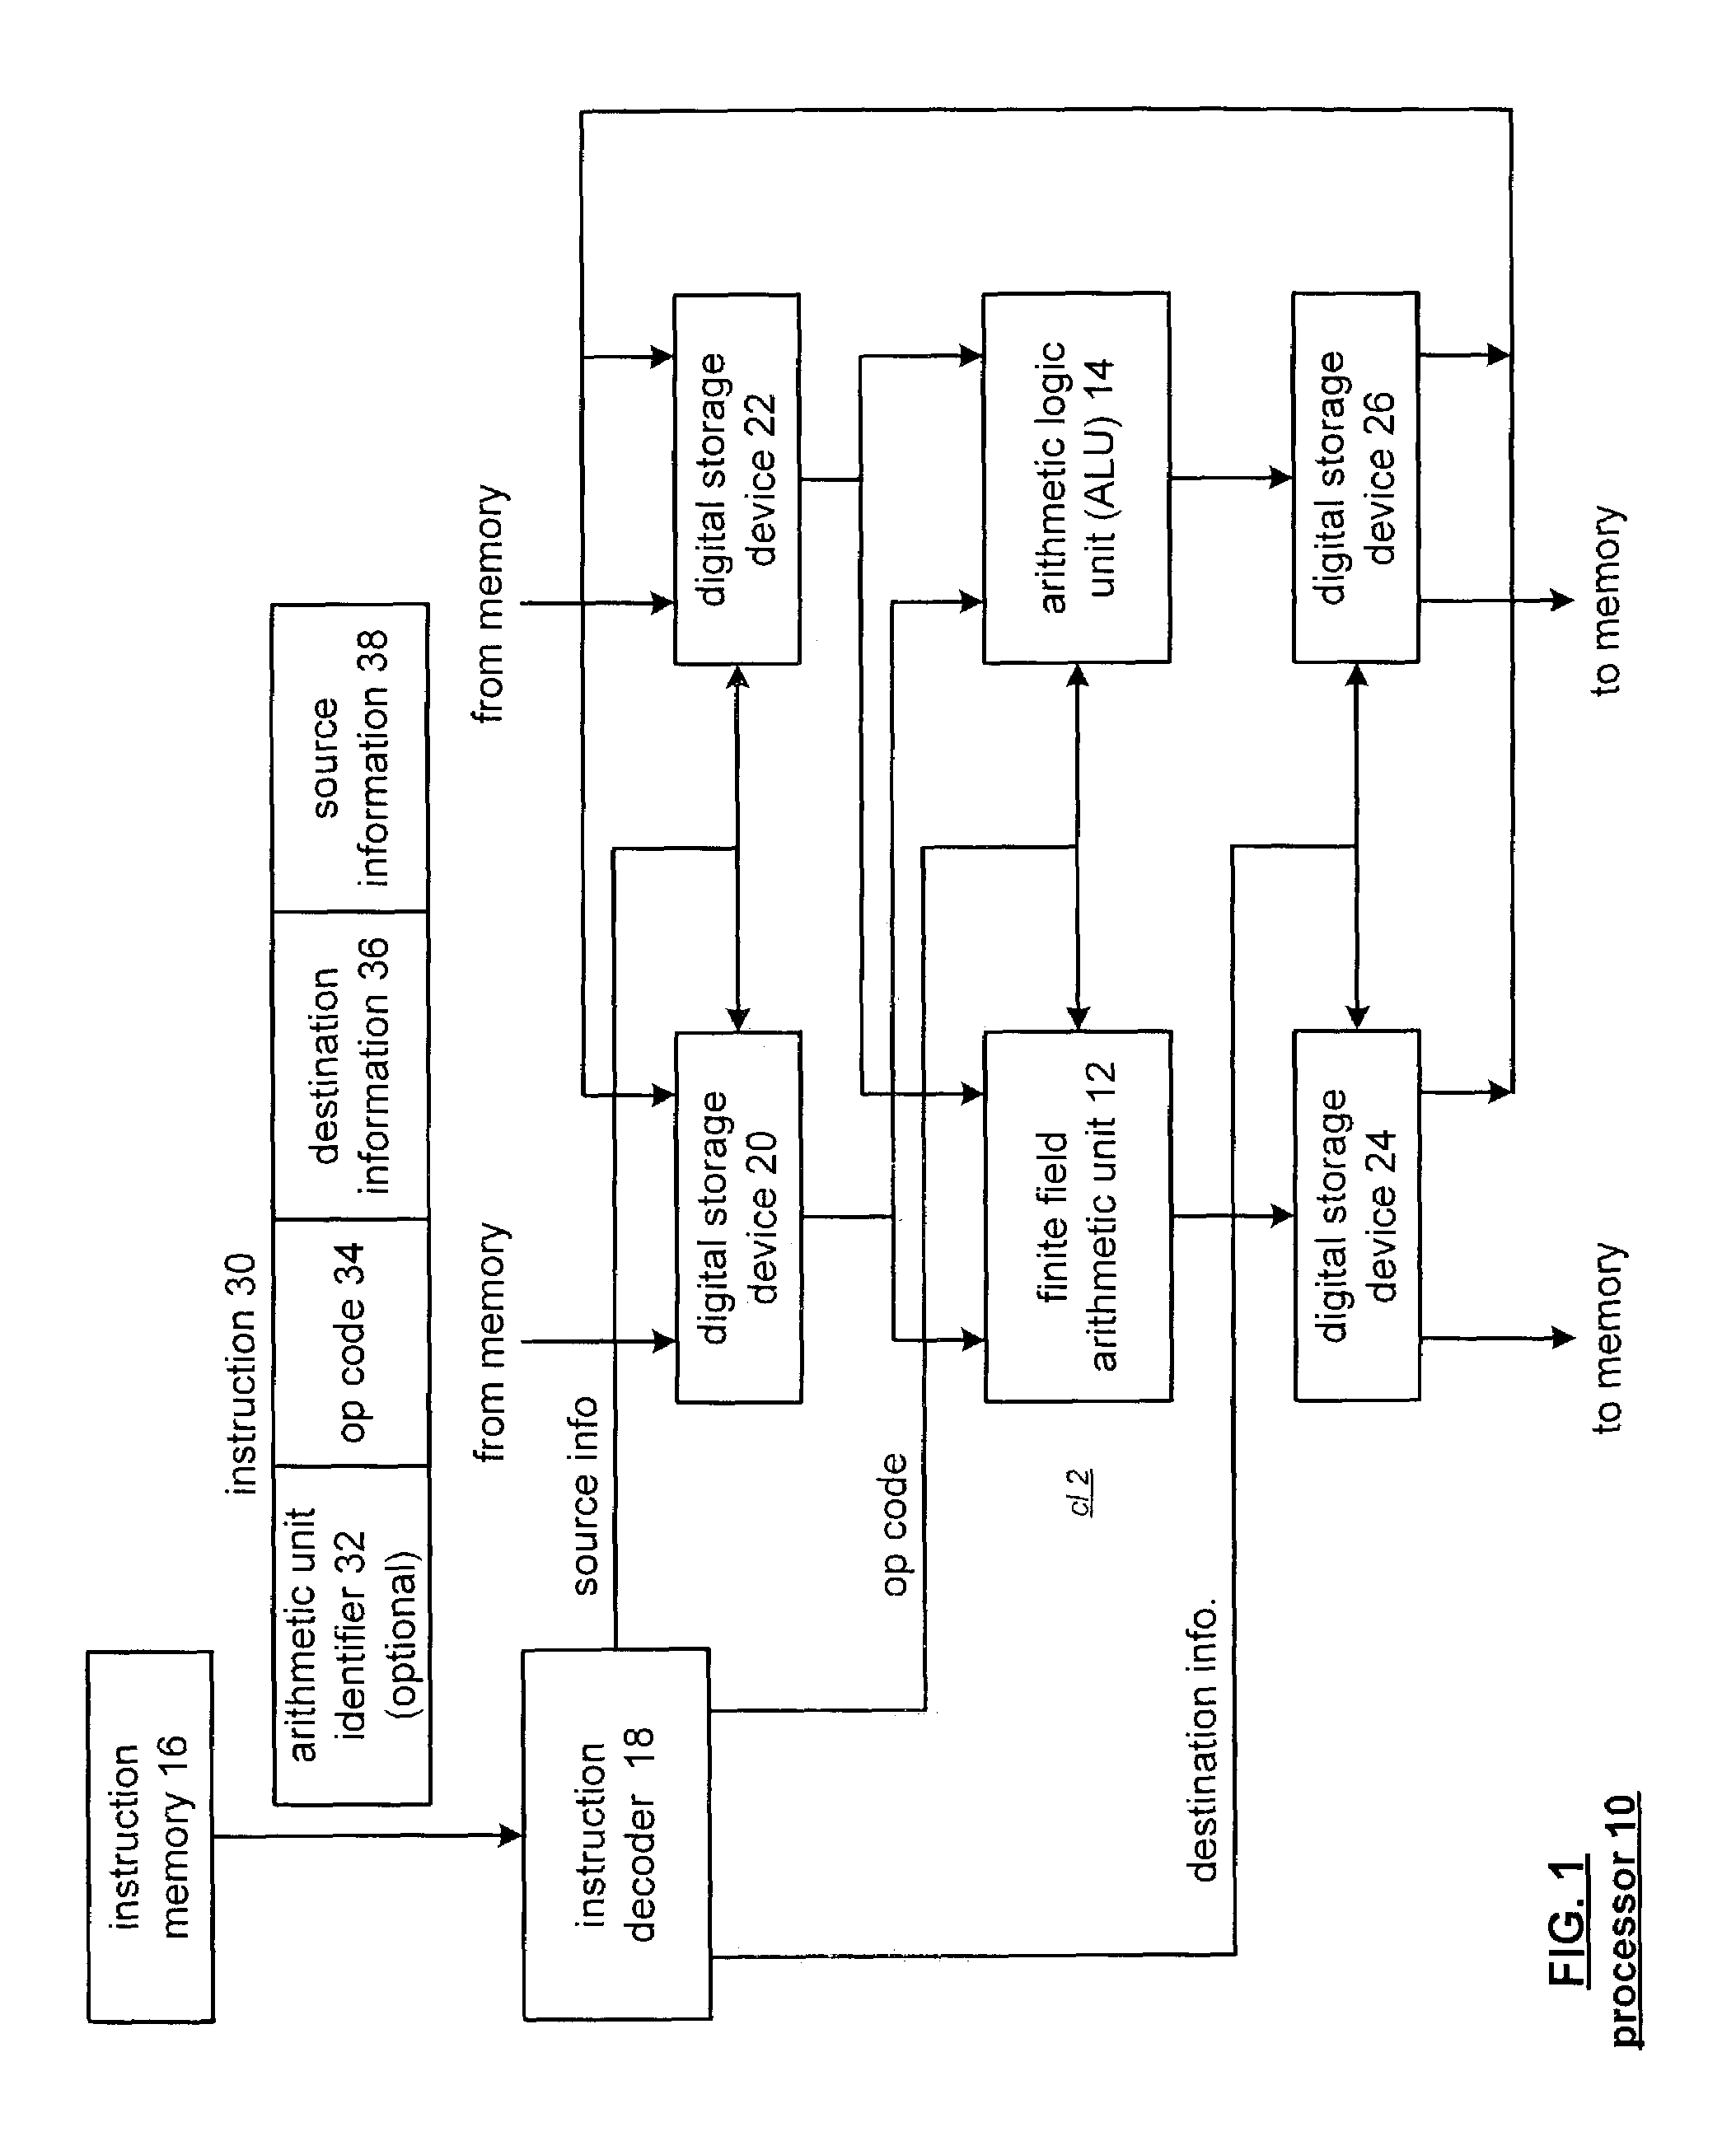 Galois field arithmetic unit for use within a processor